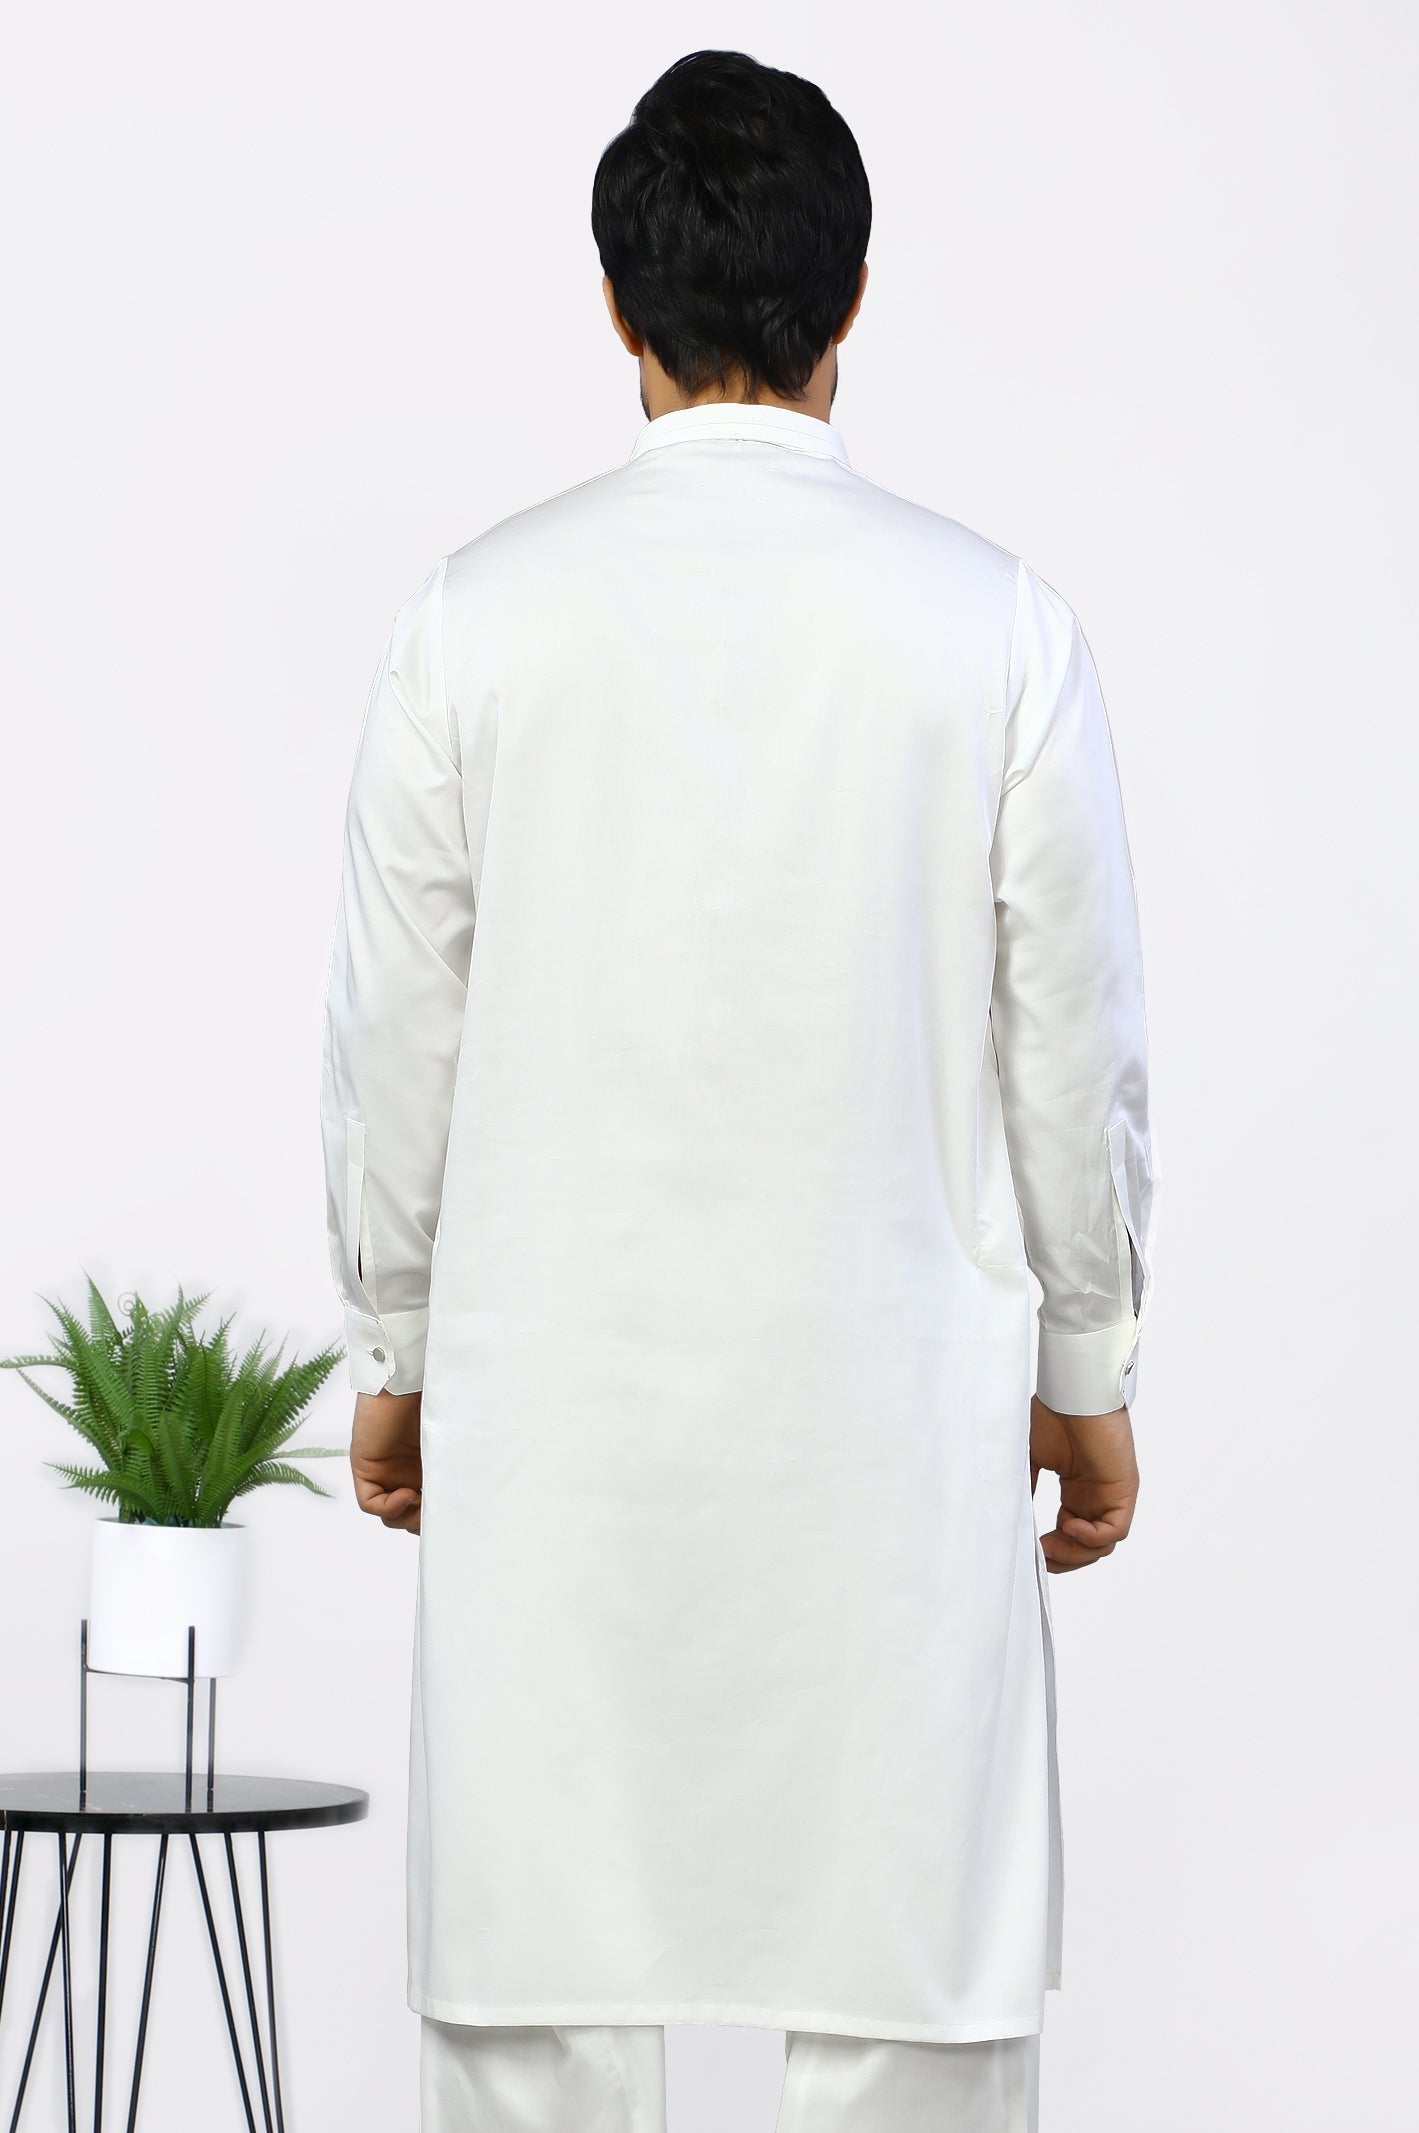 Off White Wash & Wear Shalwar Kameez From Diners